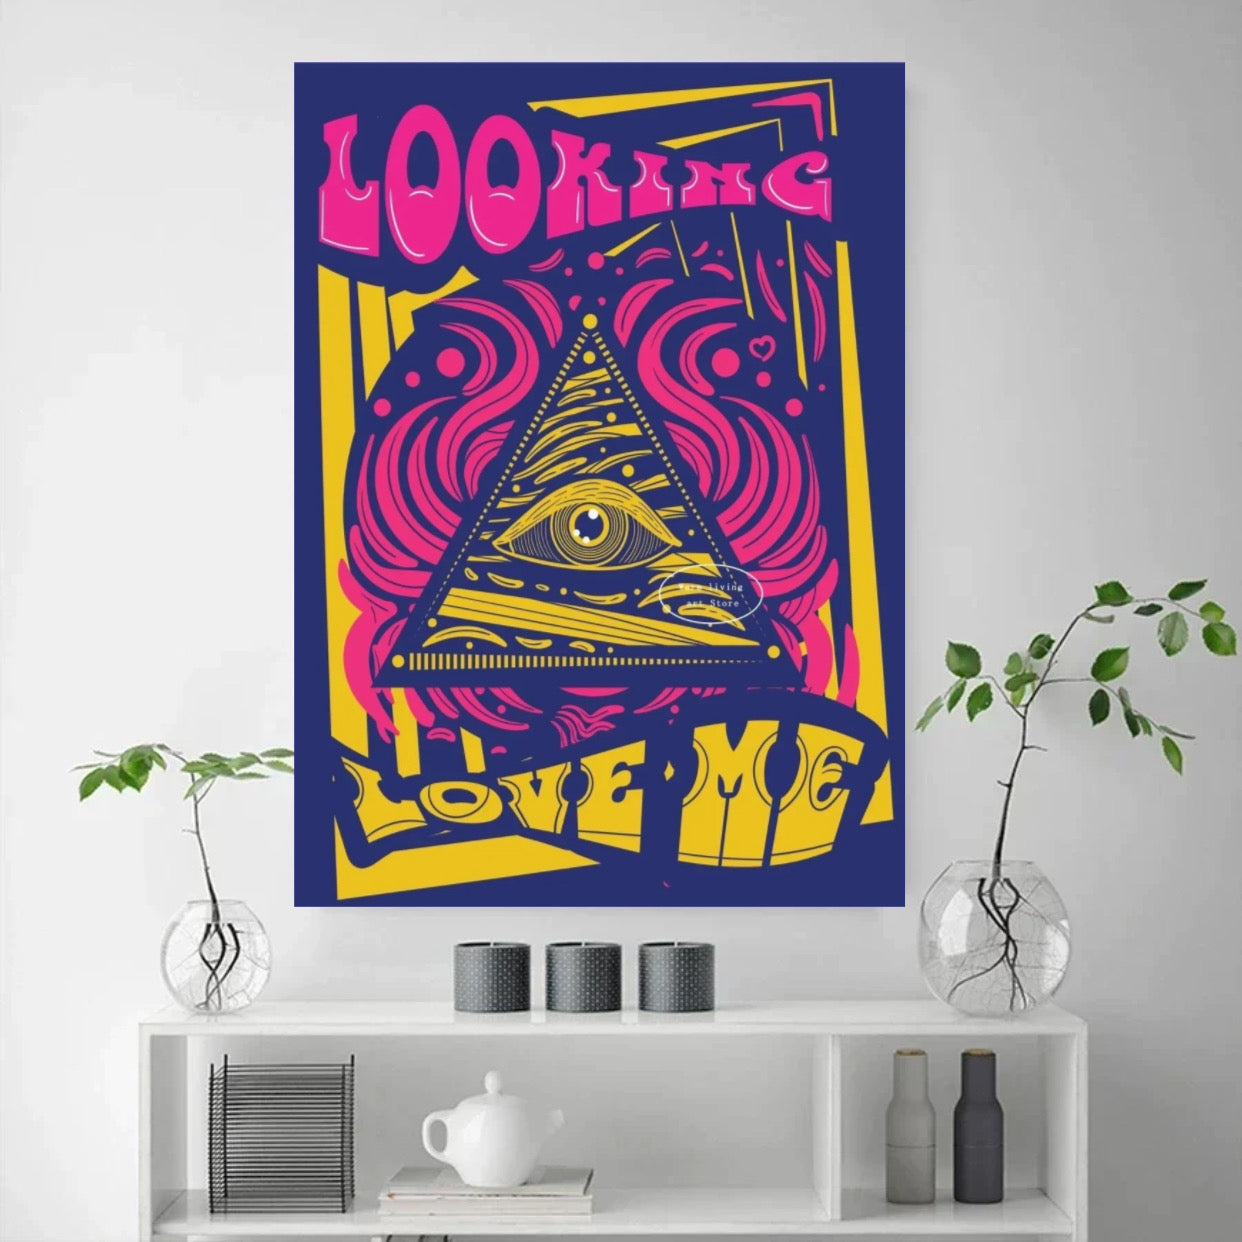 "looking love me" poster